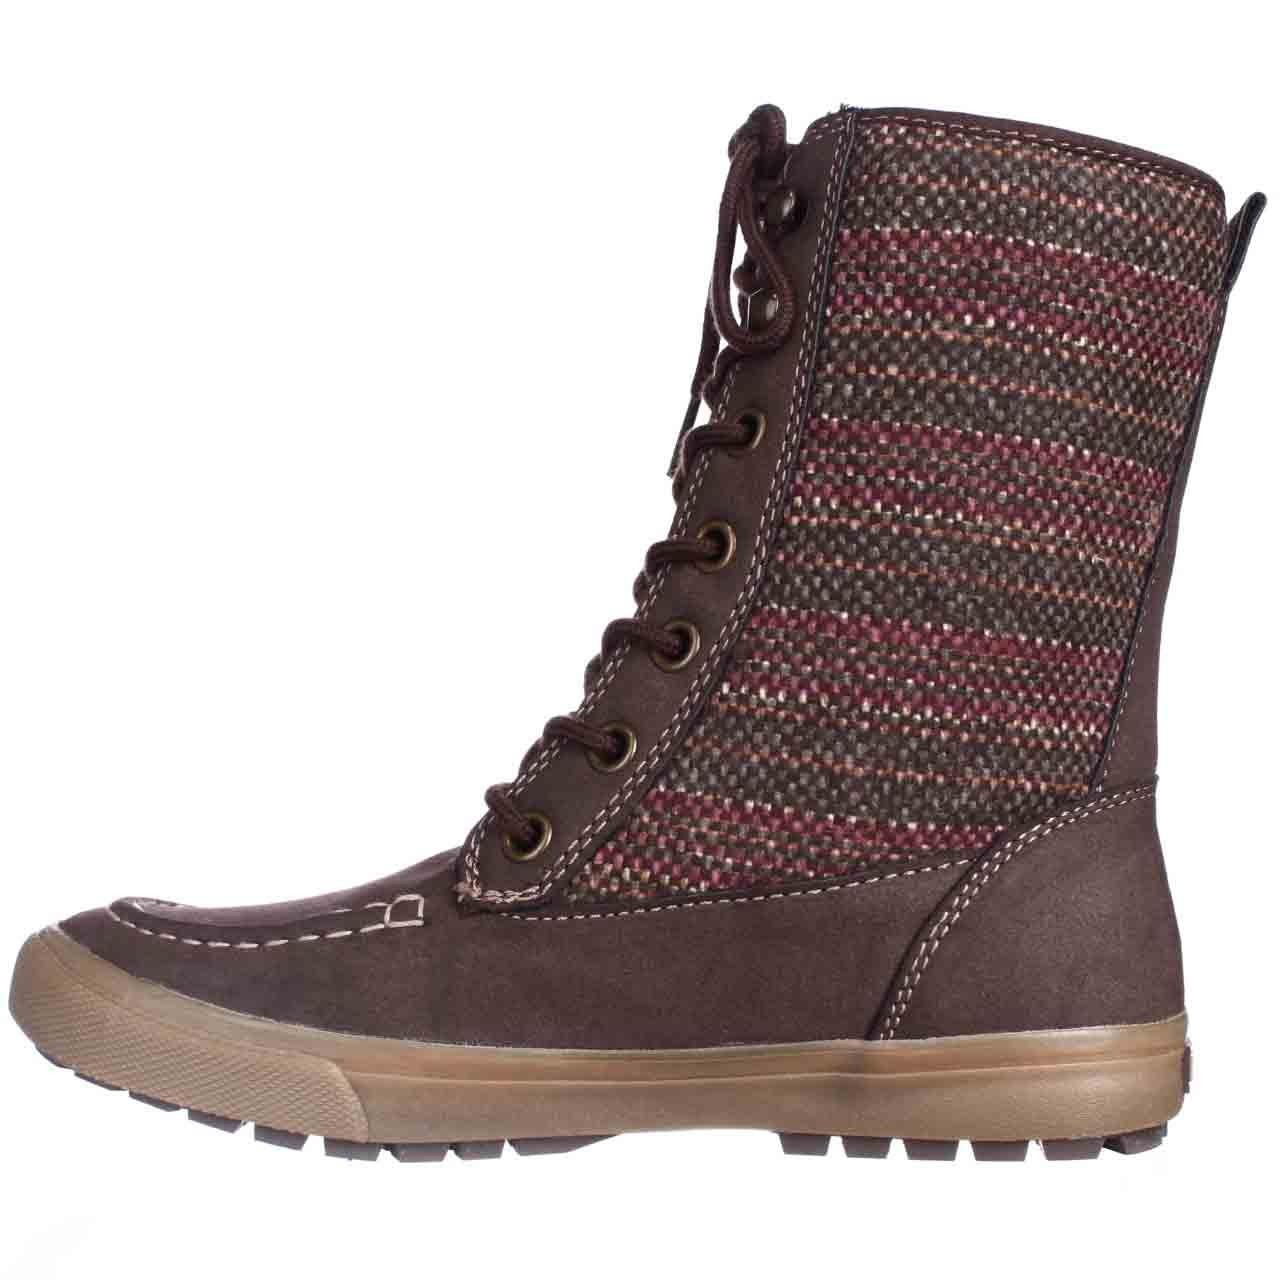 Lyst Roxy Chesapeake Midcalf Winter Boots in Brown